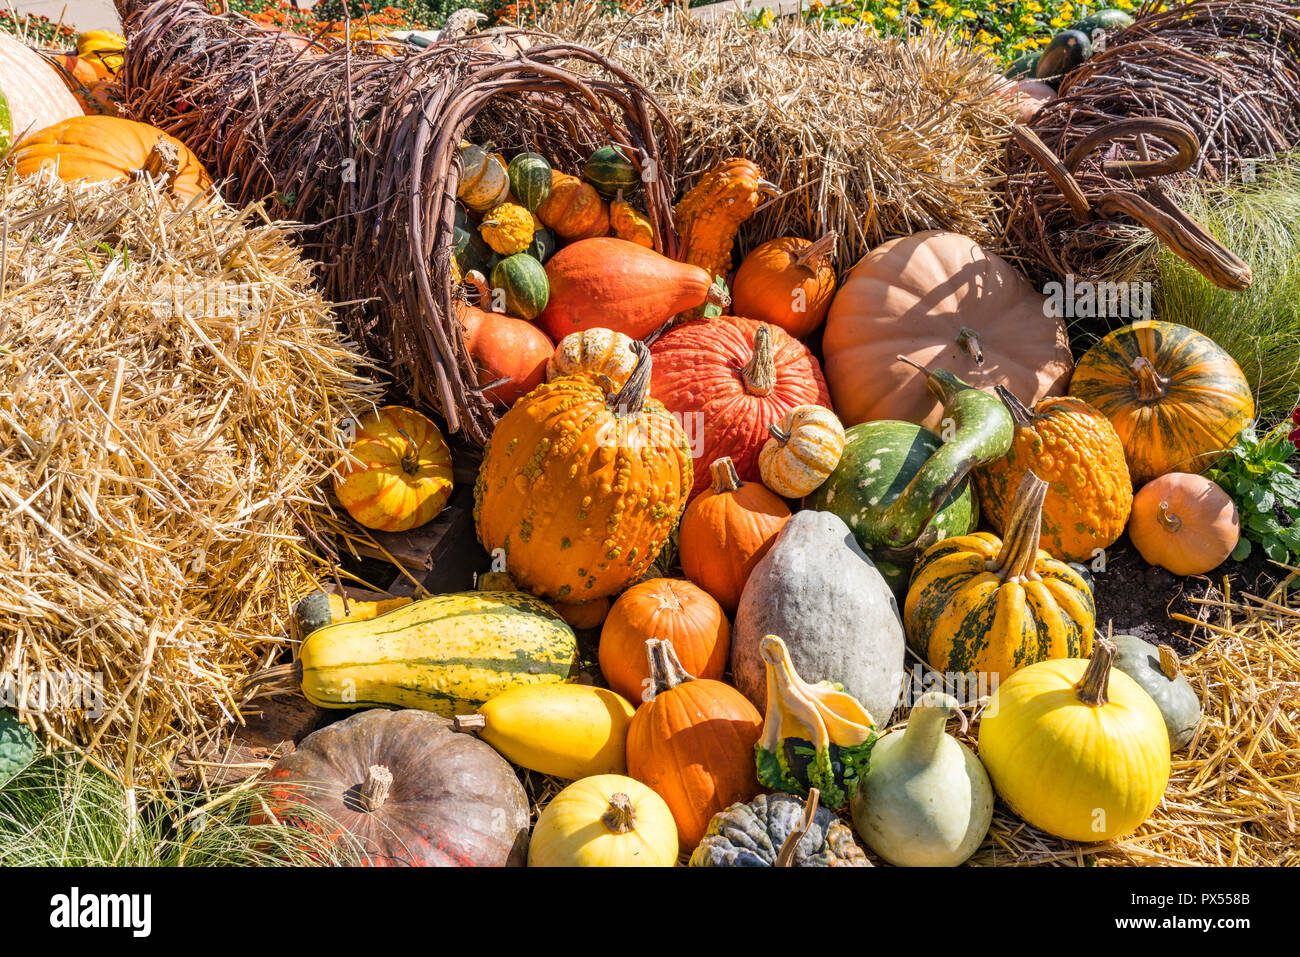 Autumn arrangement of colorful gourds and pumpkins Stock Photo